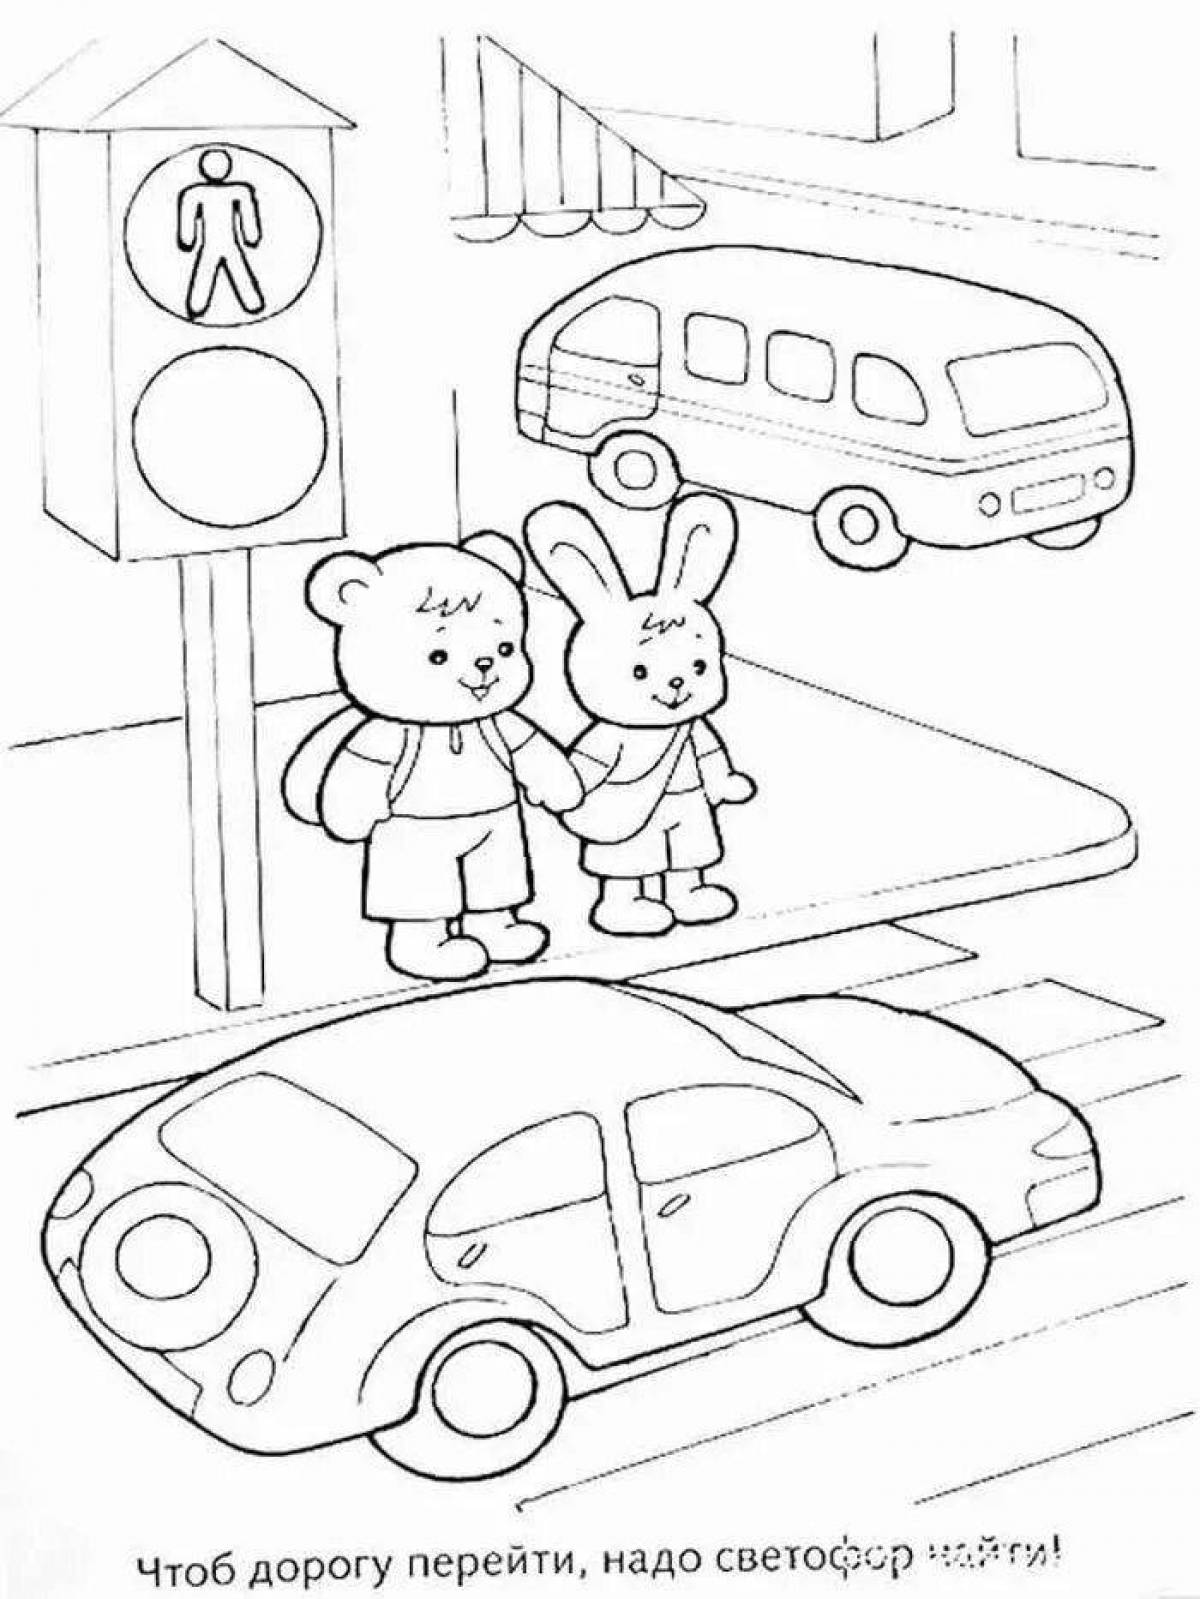 Safety fun coloring book for preschoolers